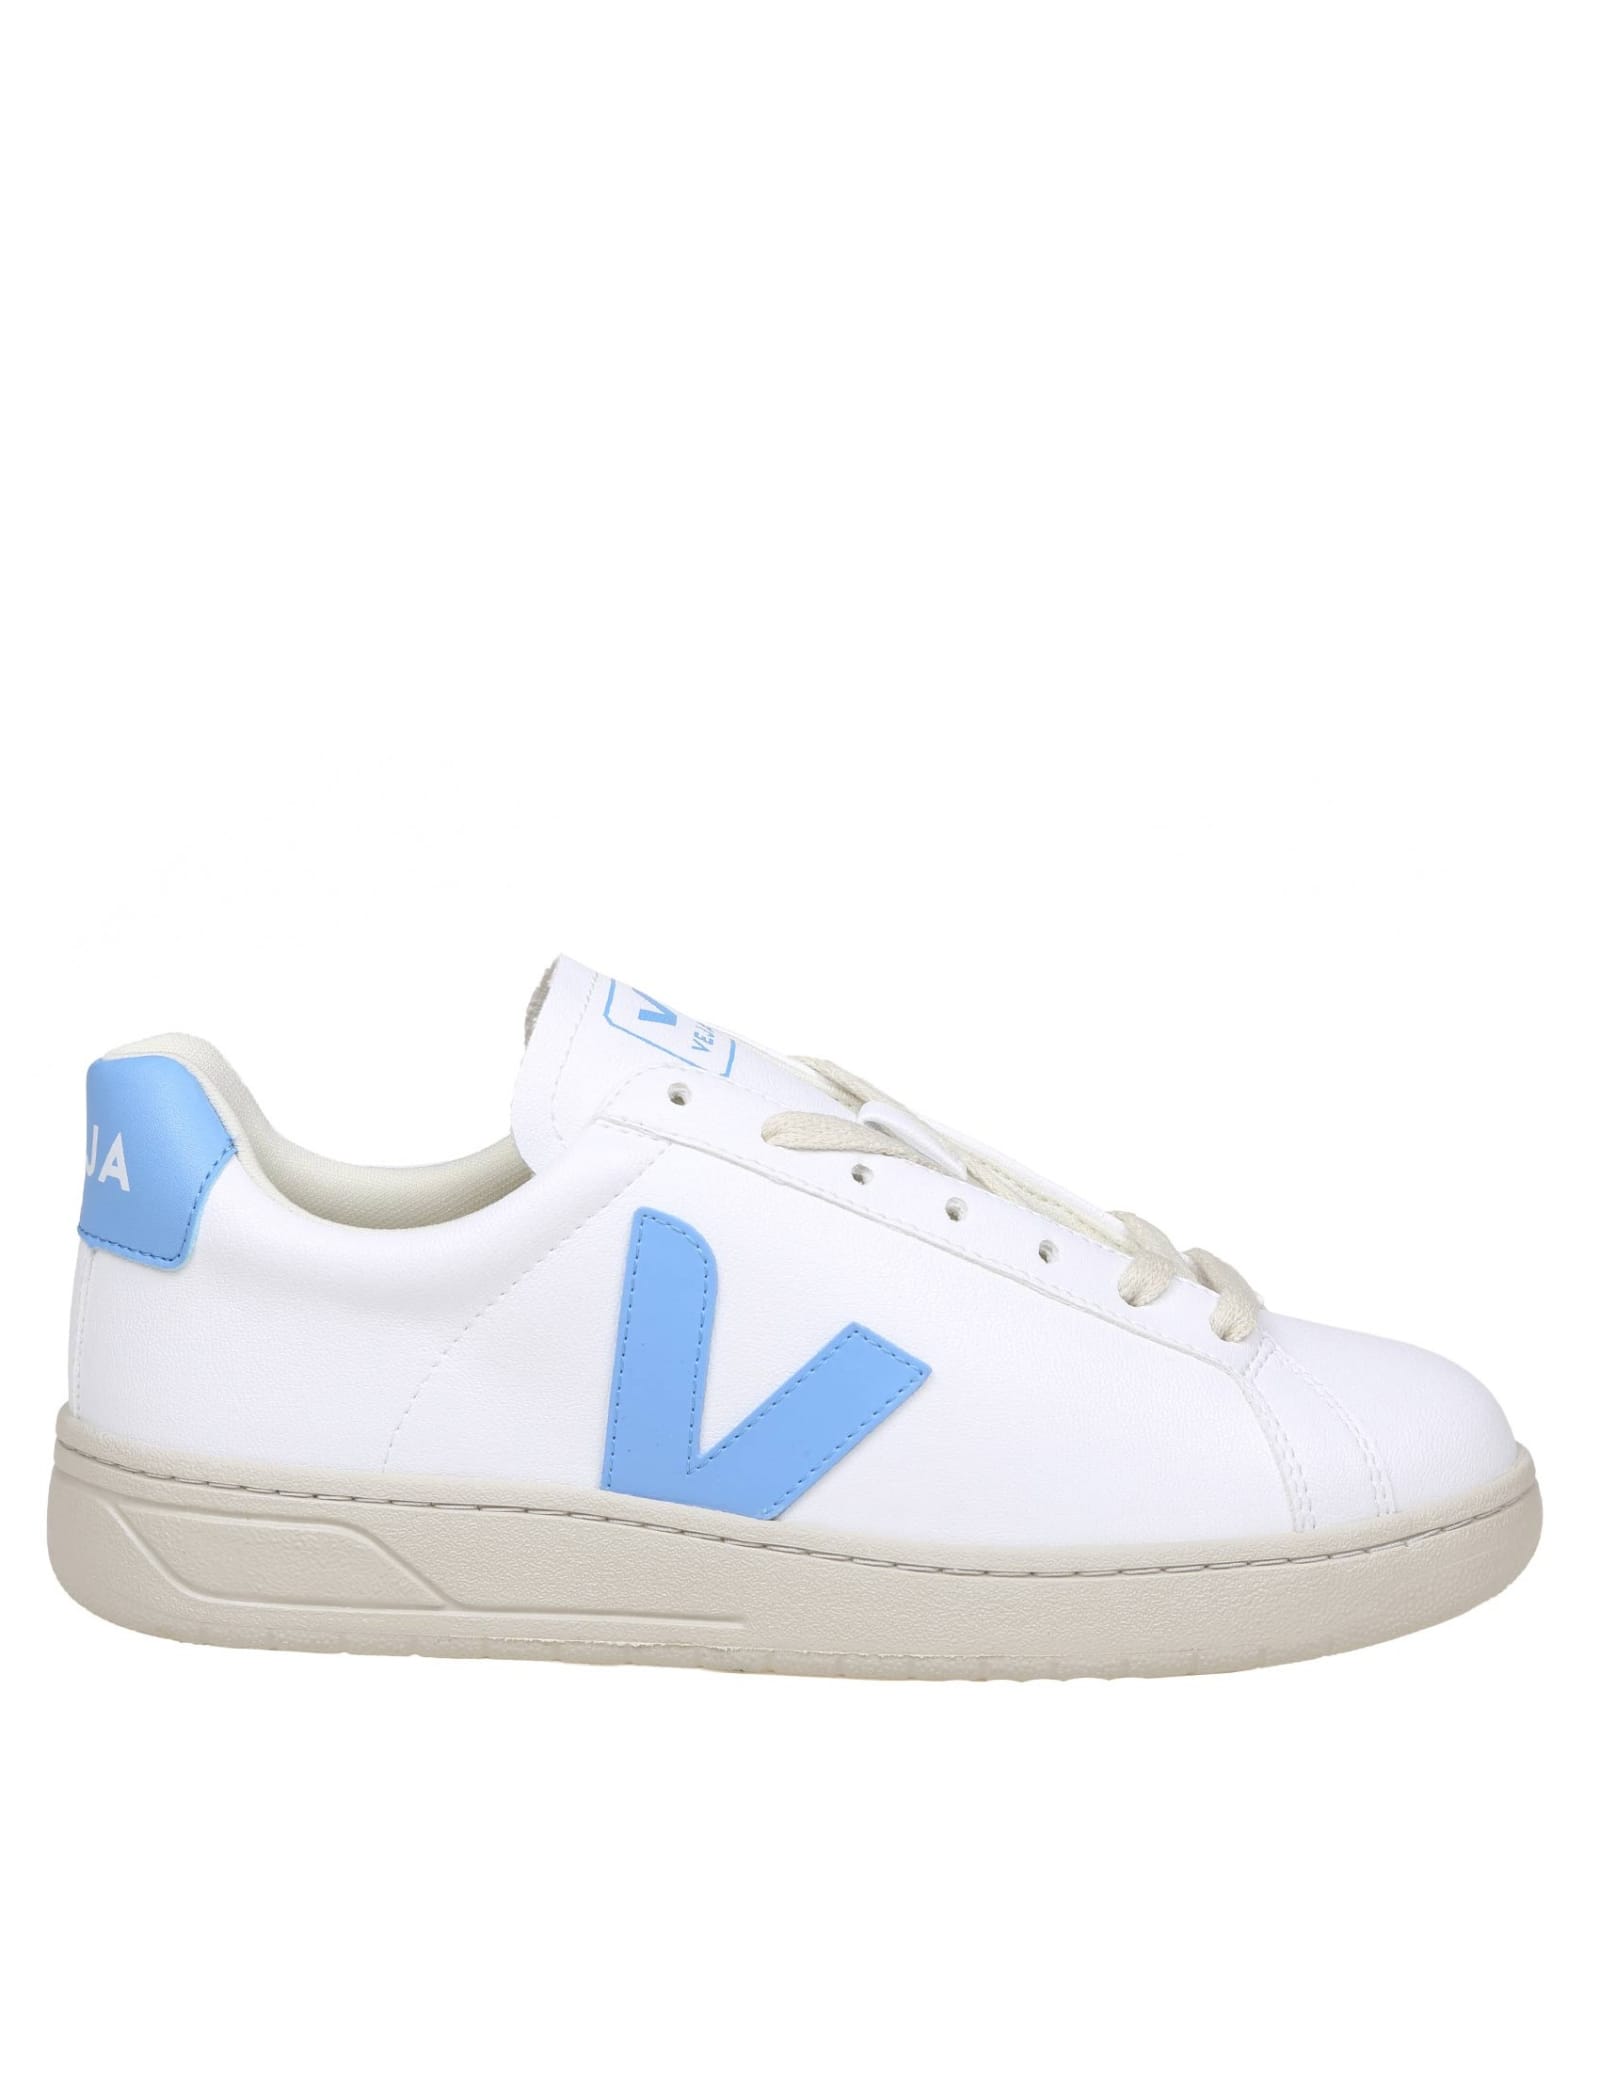 Urca Sneakers In White/light Blue Coated Cotton